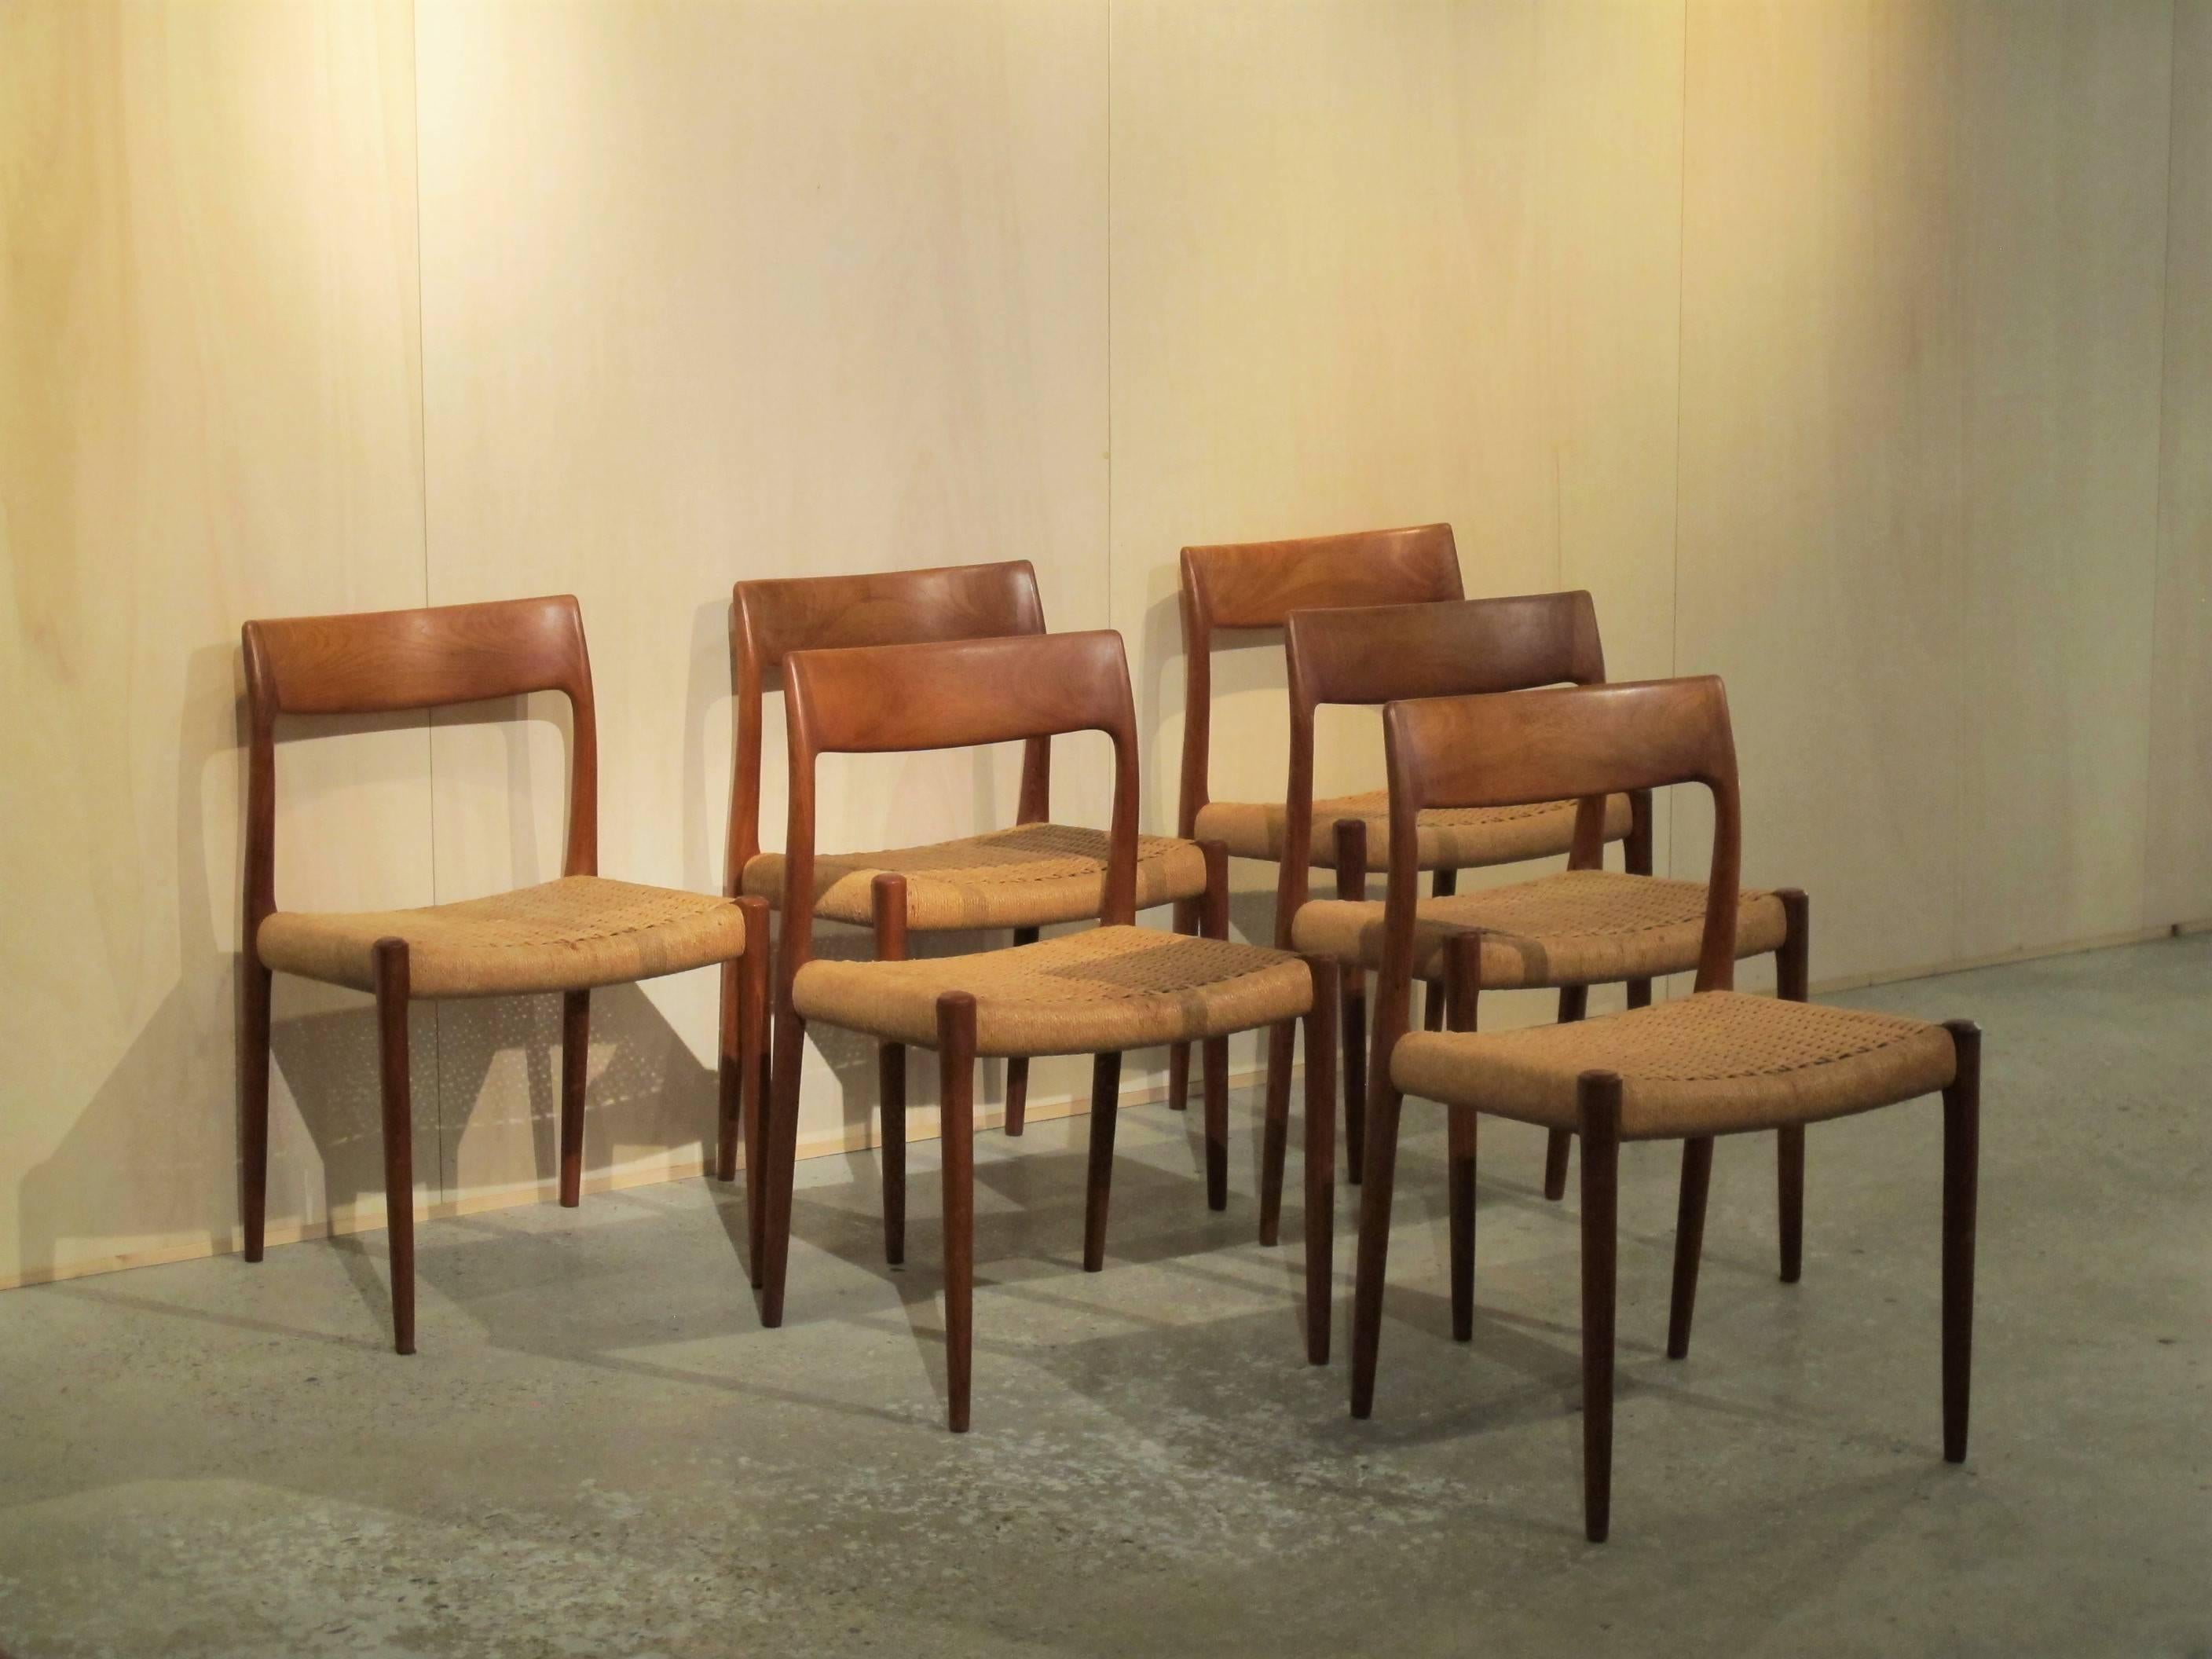 Six stylish diningroom chairs designed and executed by well-known and rewarded Danish designer Nils Otto Møller (1921-1981). 
Simple elegant chairs: teak with papercord seating (ca.1955)

